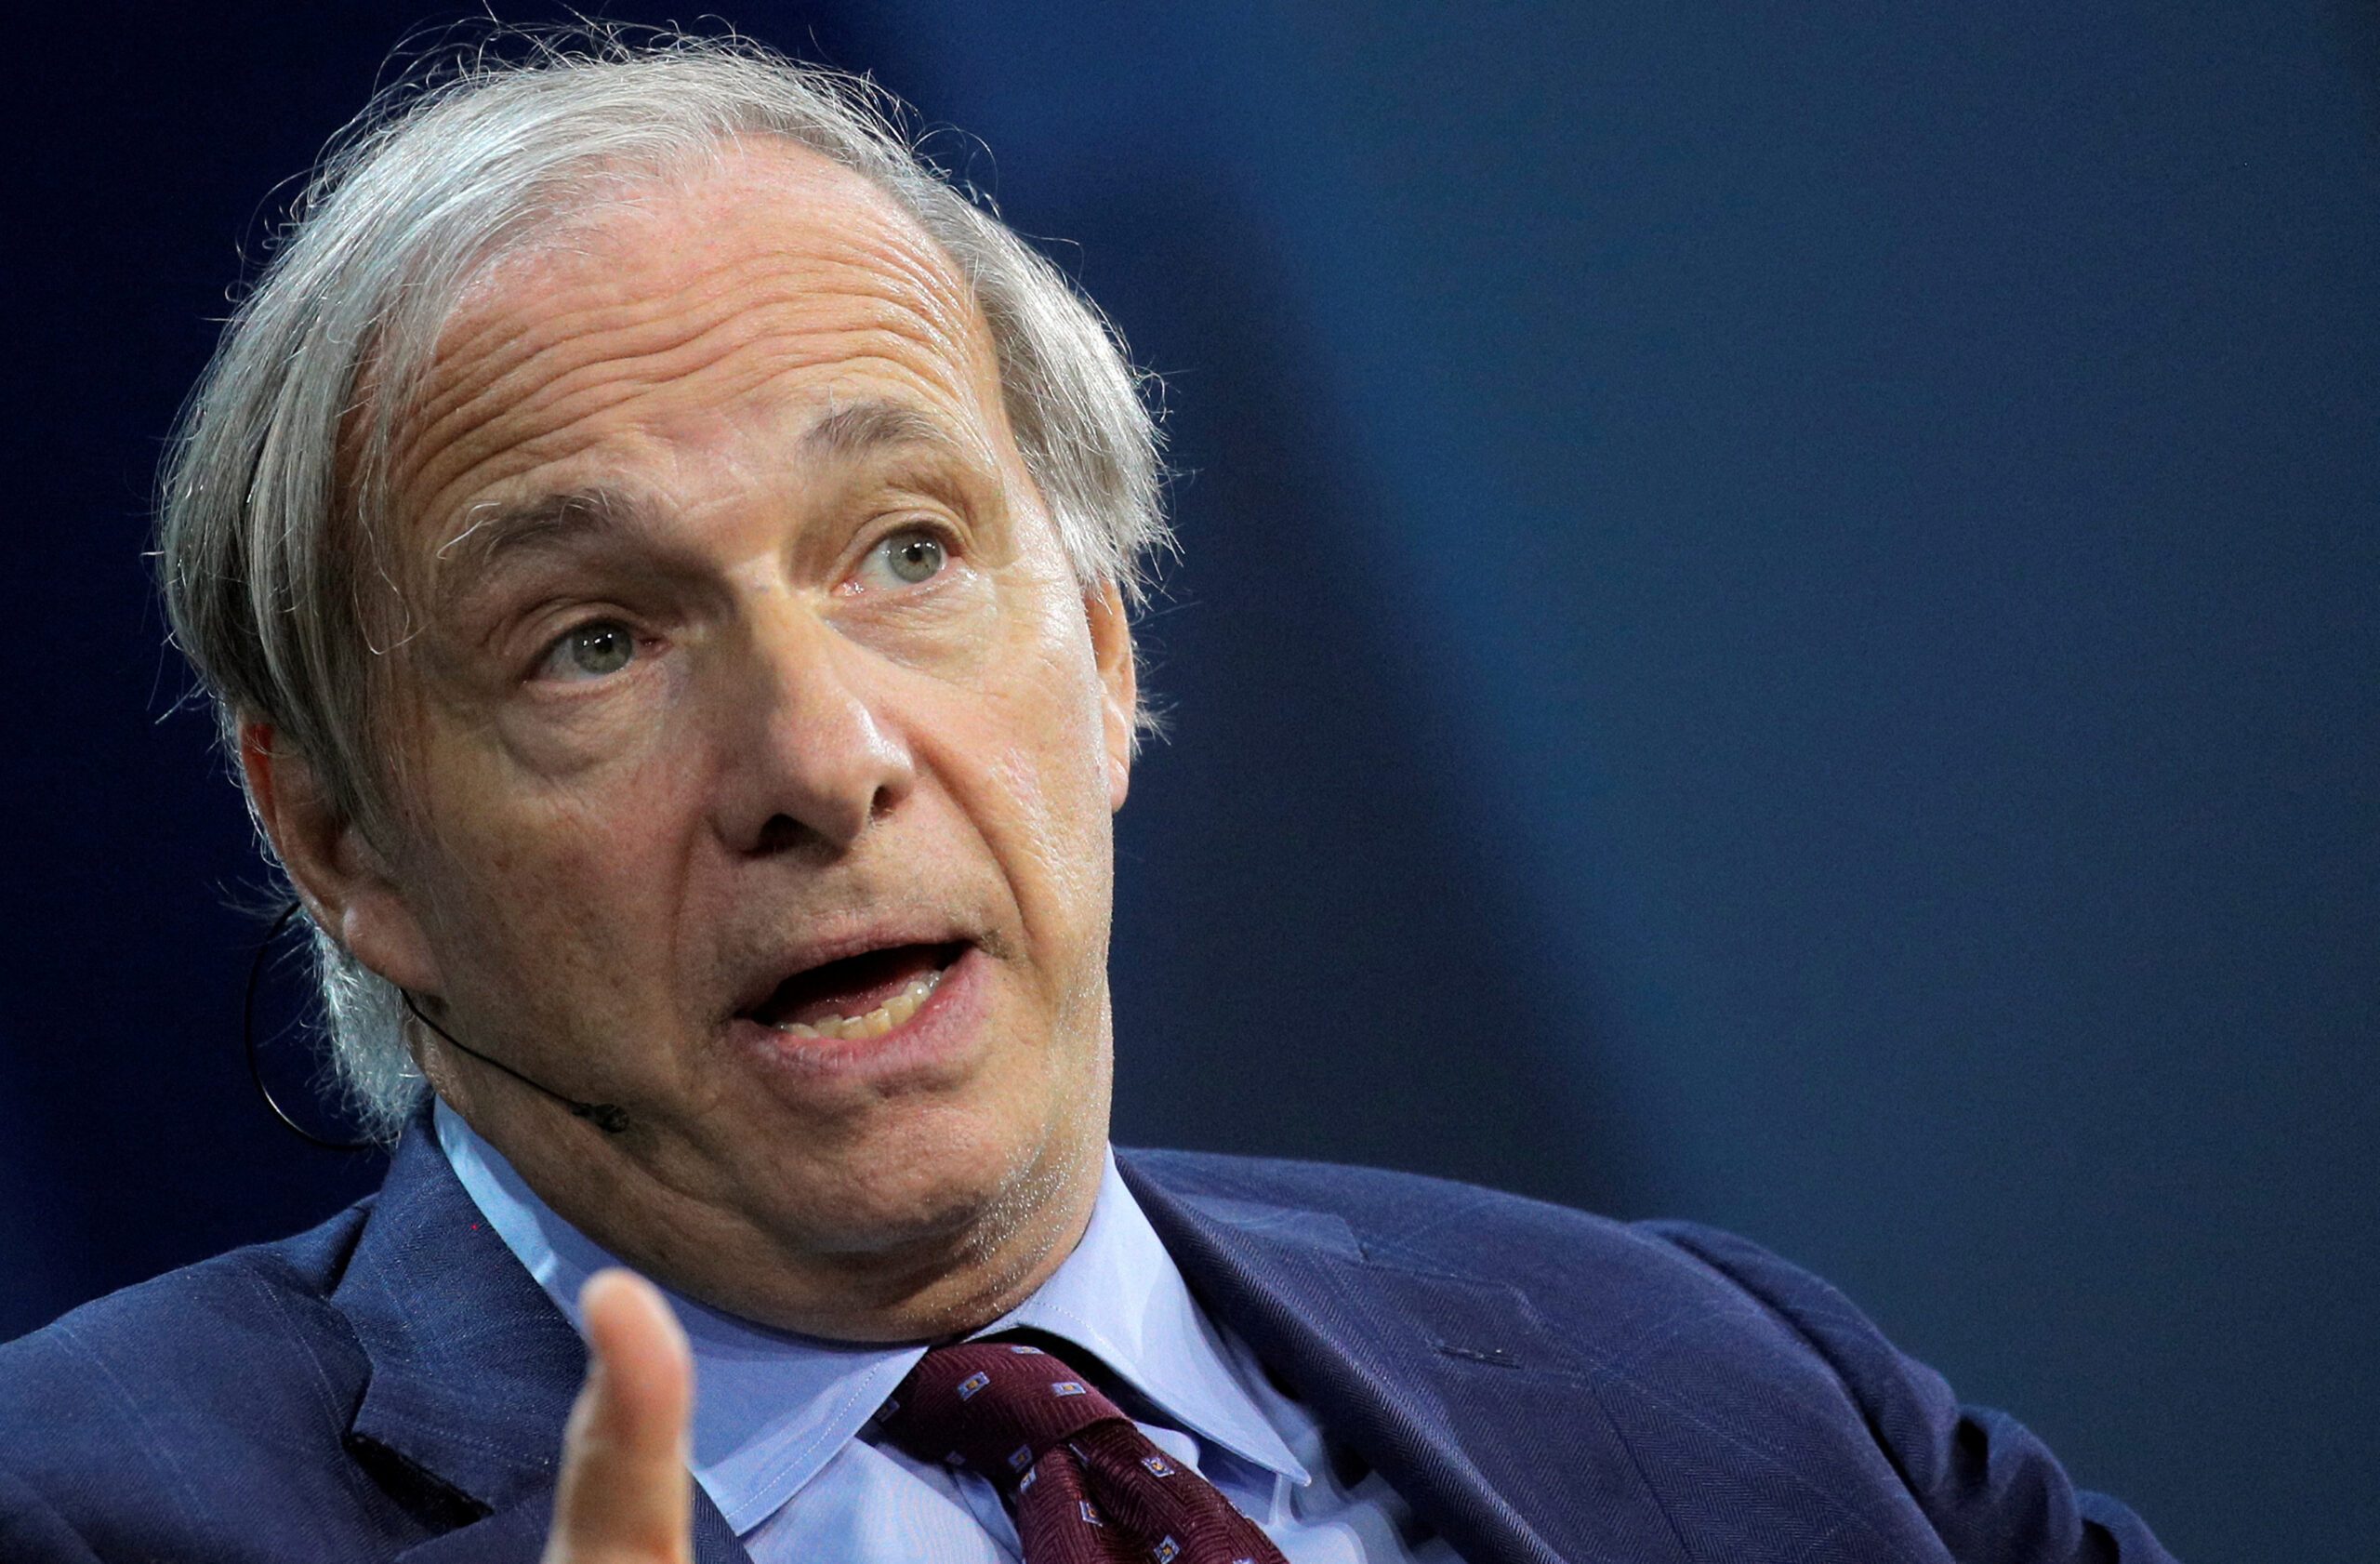 Global investors fret about blowback for China exposure, says Dalio